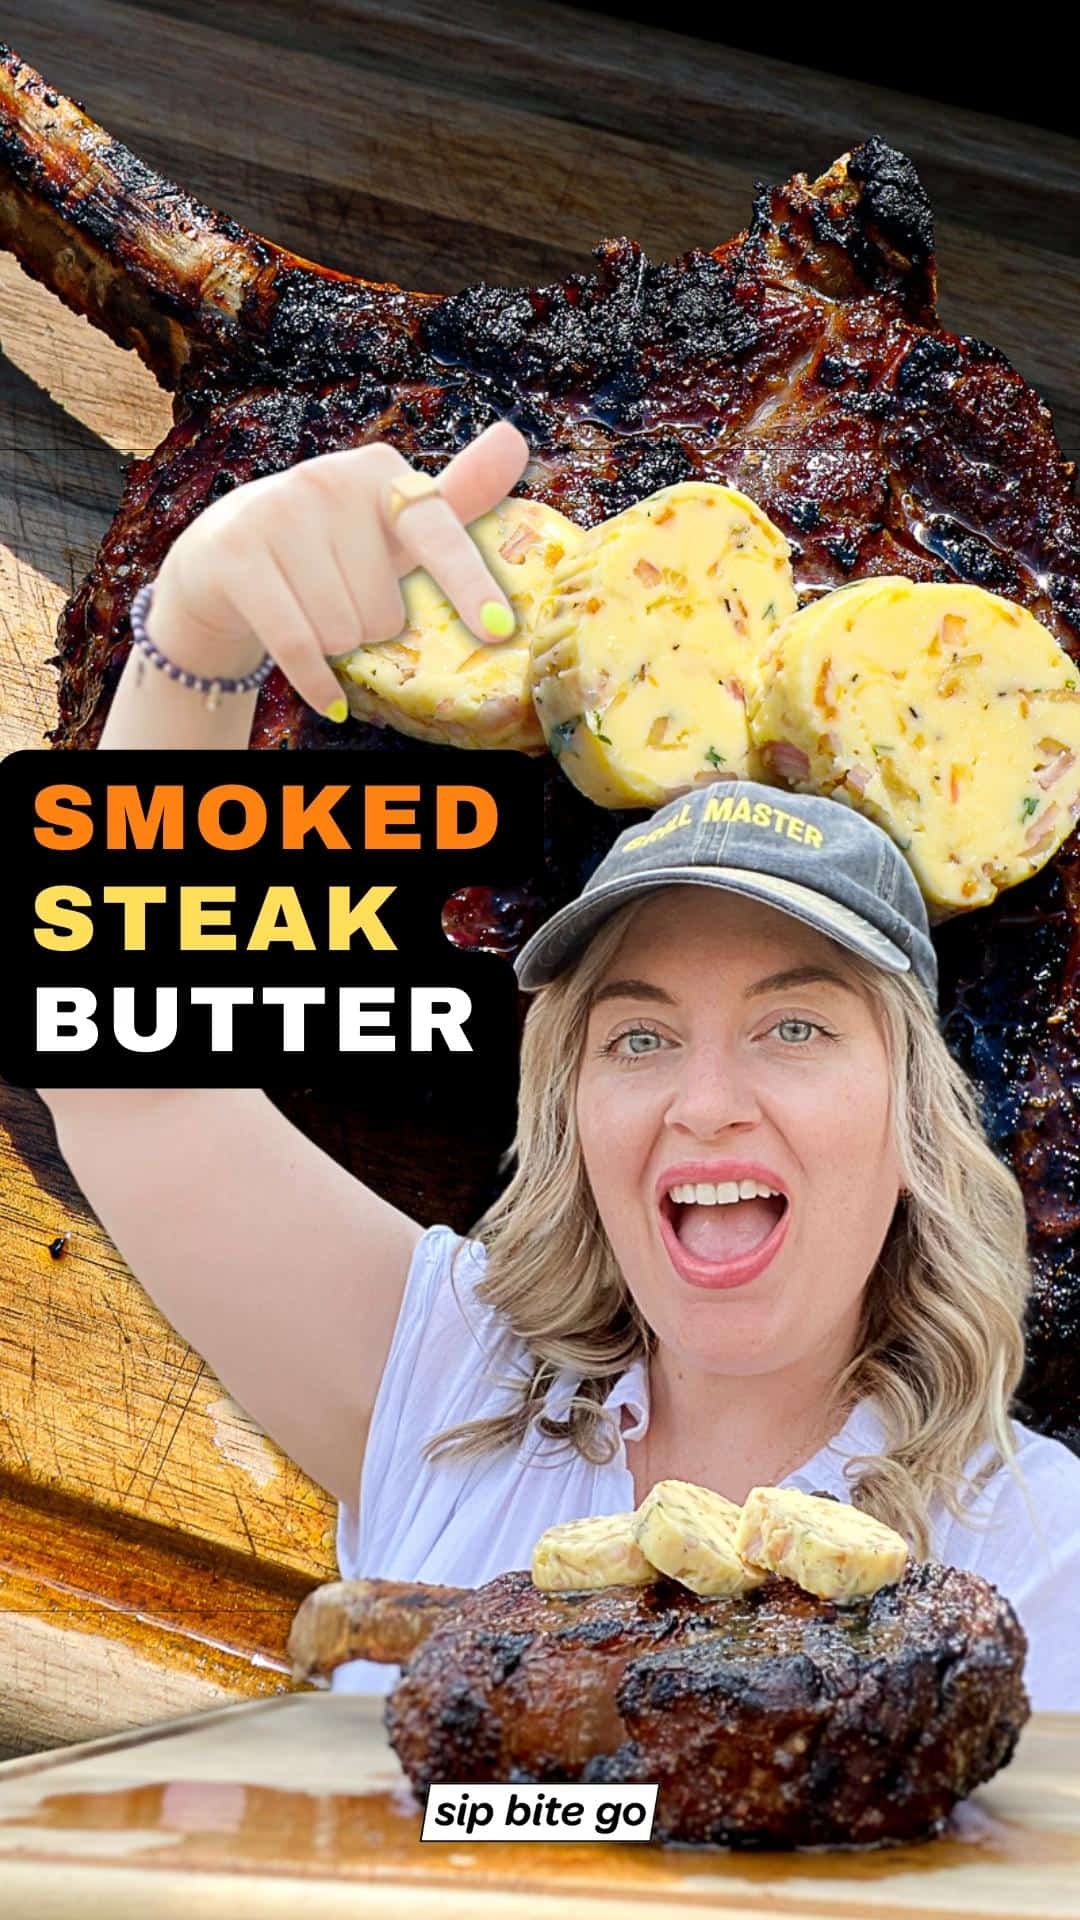 SMOKED STEAK BUTTER images with smoker food blogger Sip Bite Go's Jenna Passaro and text overlay